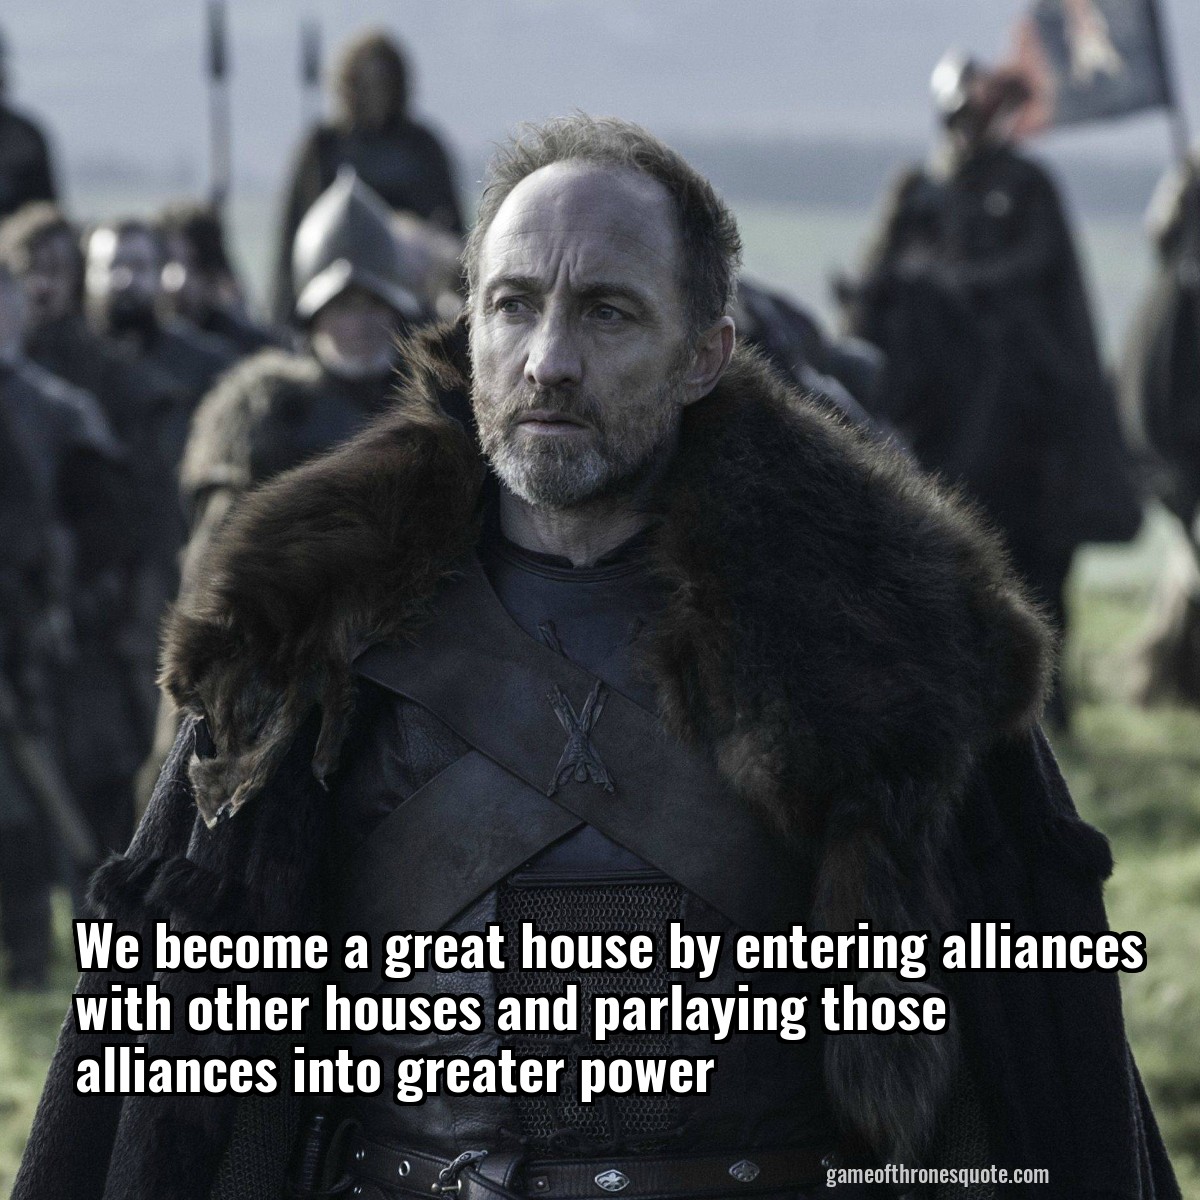 We become a great house by entering alliances with other houses and parlaying those alliances into greater power